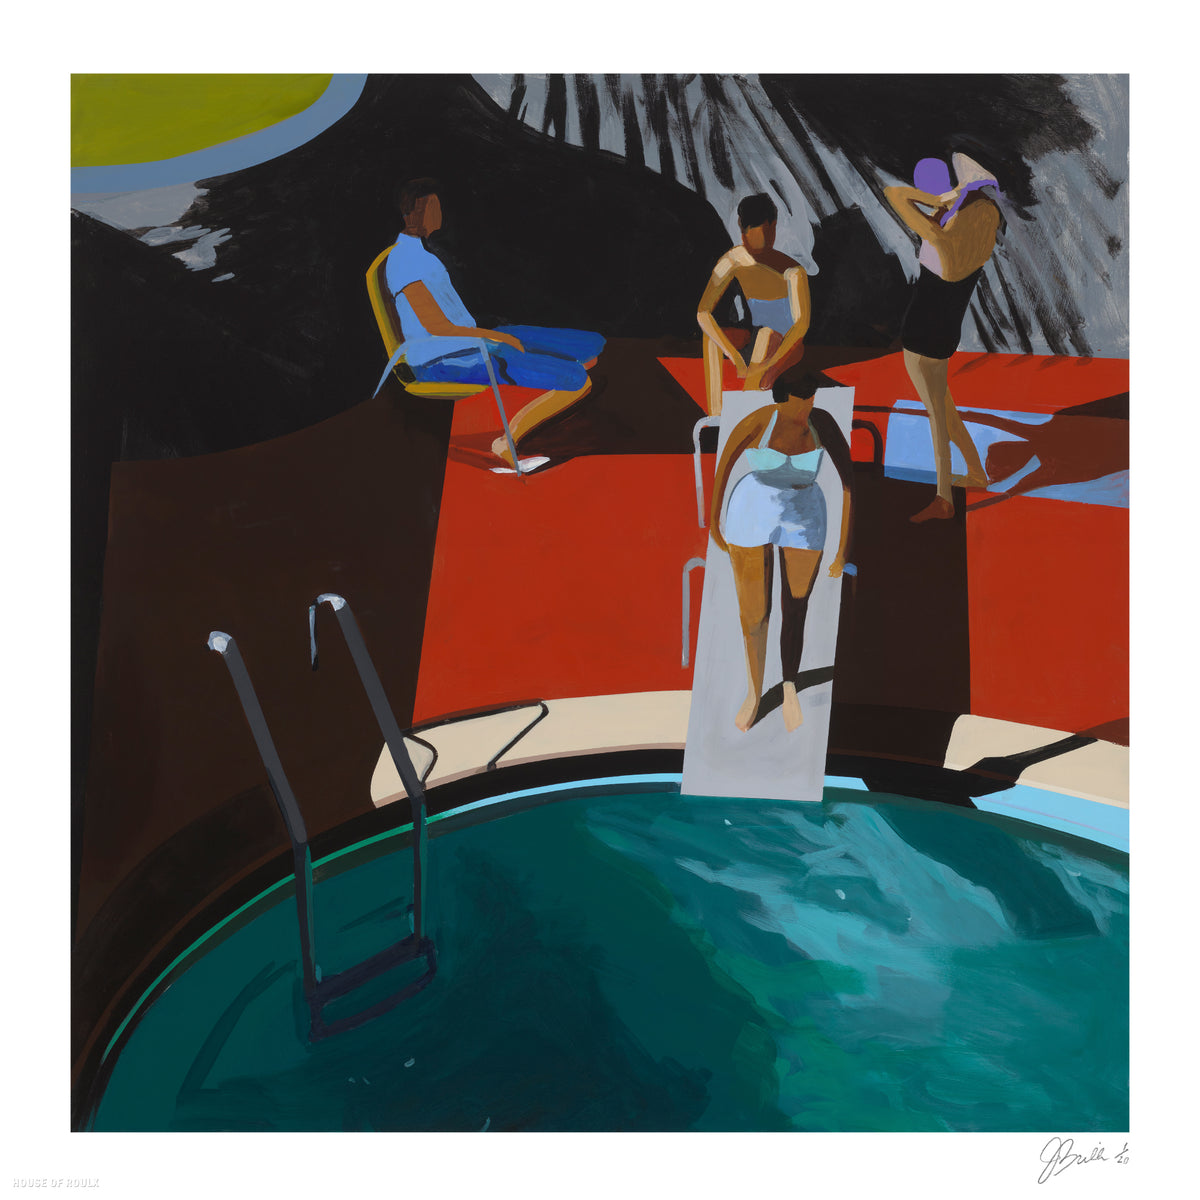 Jessica Brilli &quot;Pool From Above&quot; - Archival Print, Limited Edition of 20 - 17 x 17&quot;